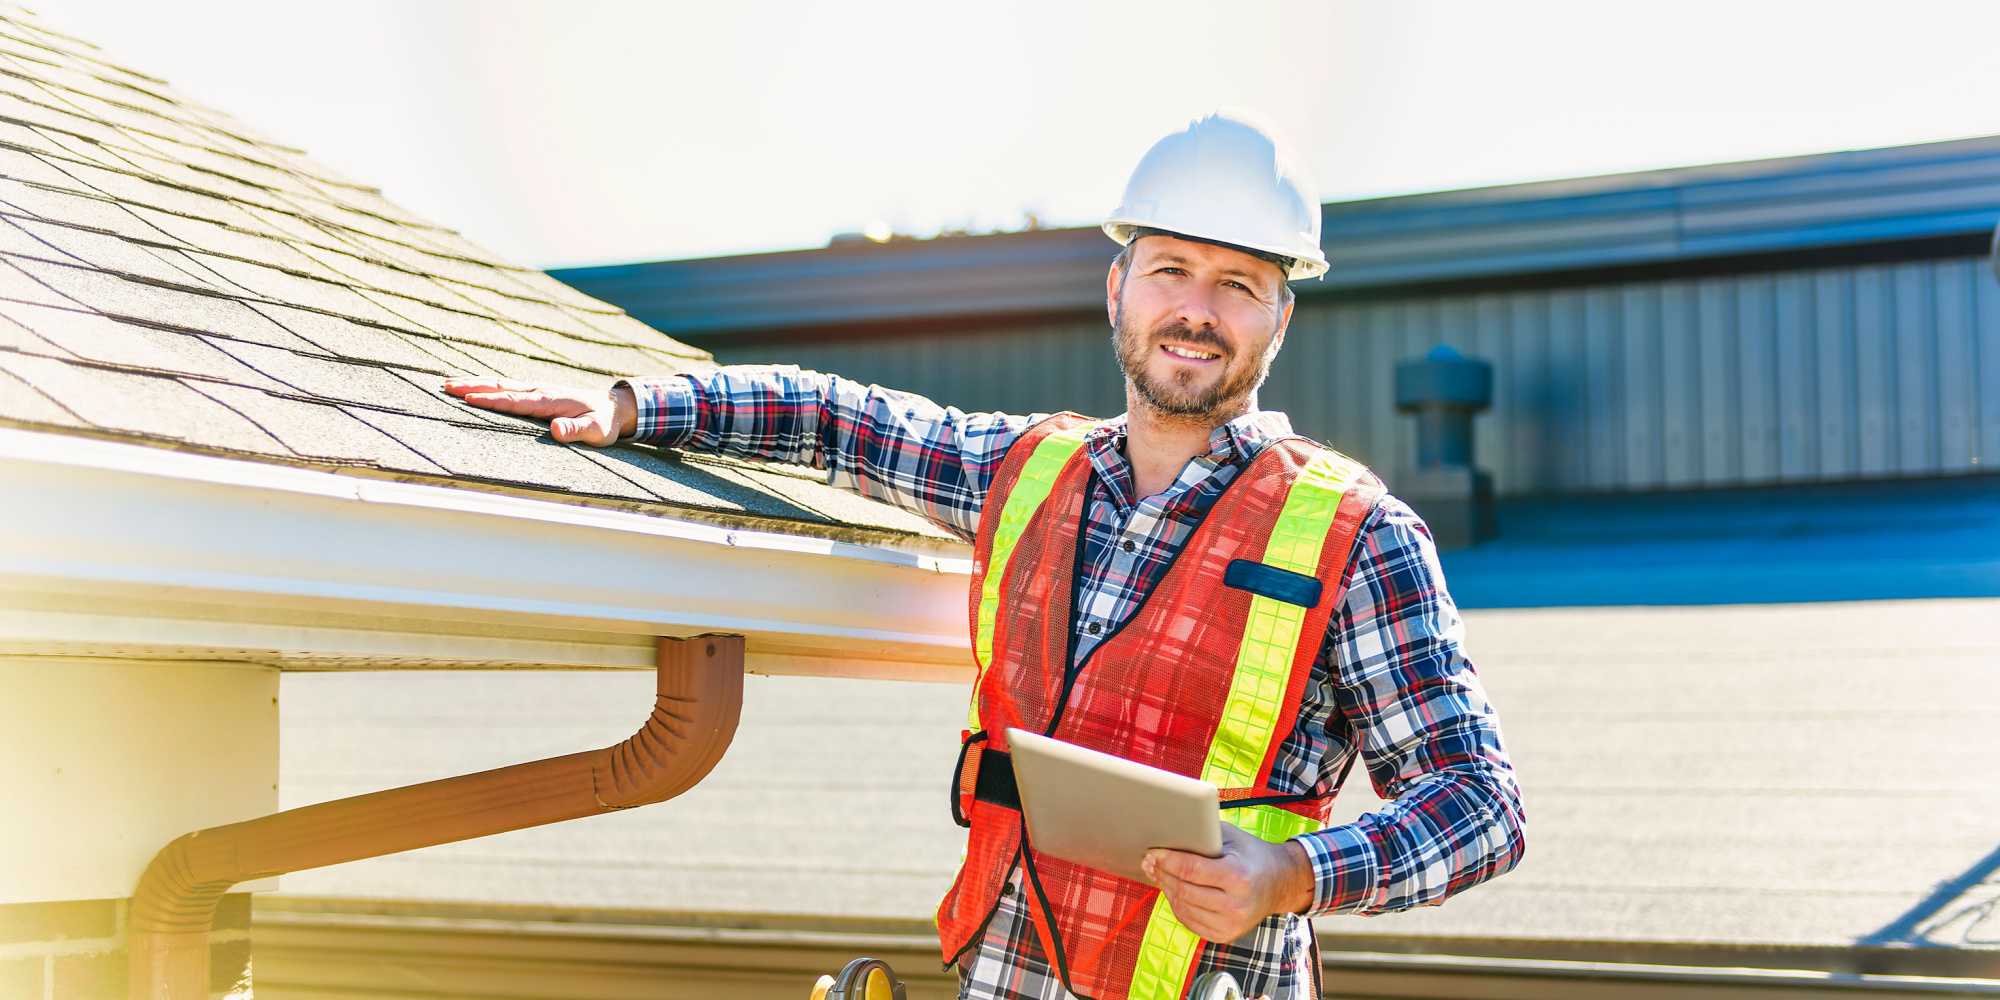 Identifying Reliable Roofing Companies Near Me